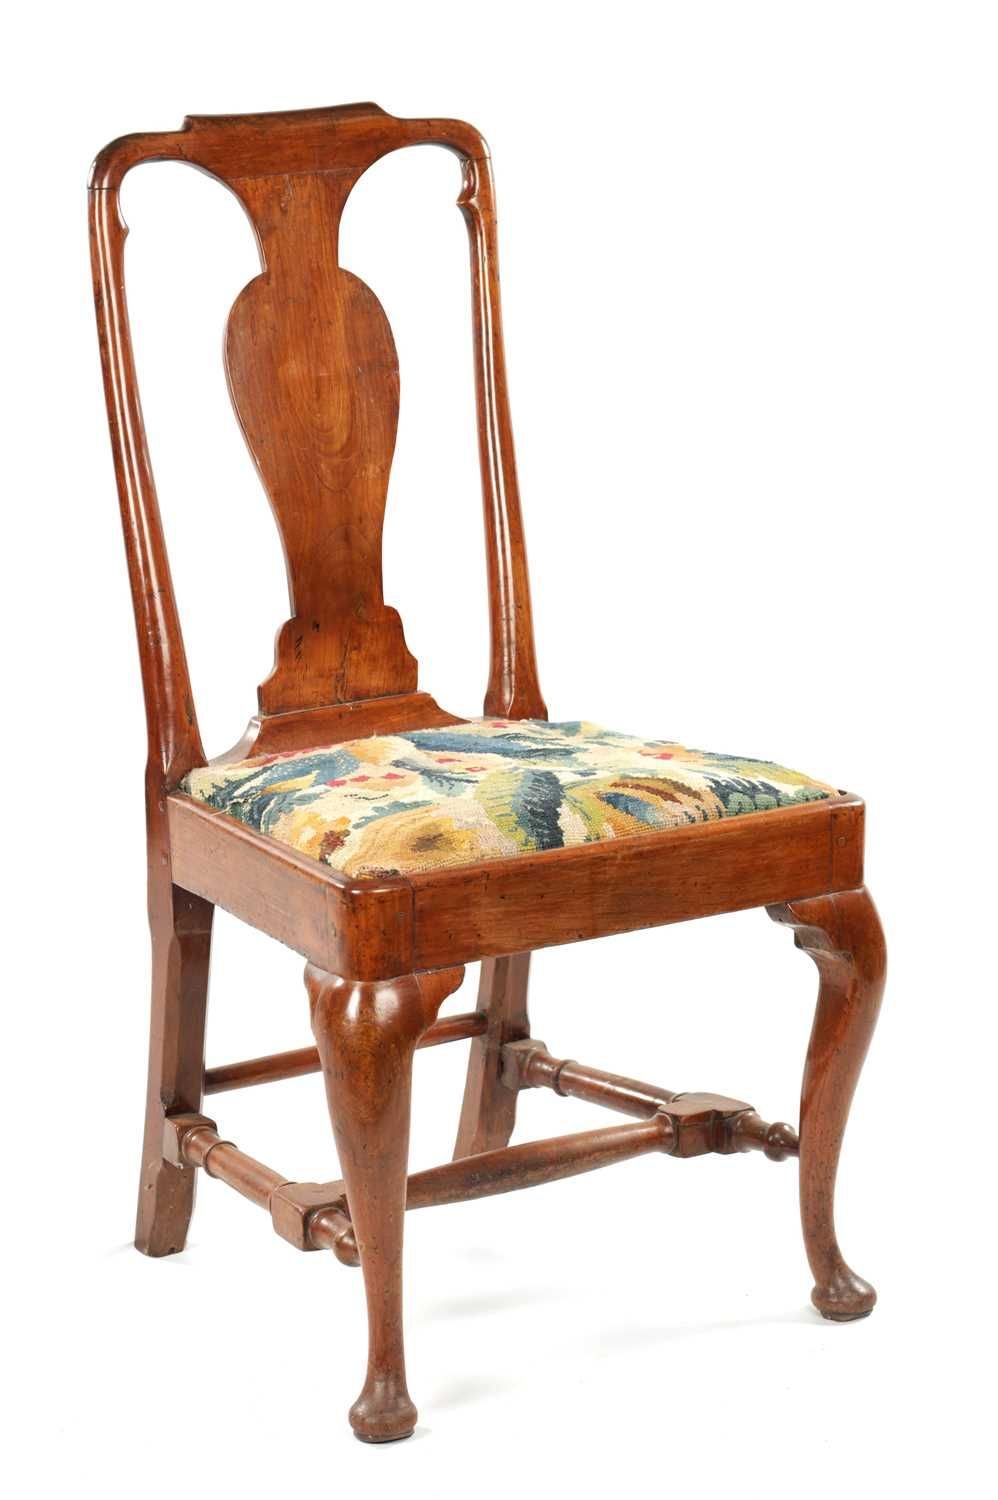 AN EARLY 18TH CENTURY FRUITWOOD SIDE CHAIR WITH PERIOD NEEDLEWORK COVERED SEAT 一&hellip;